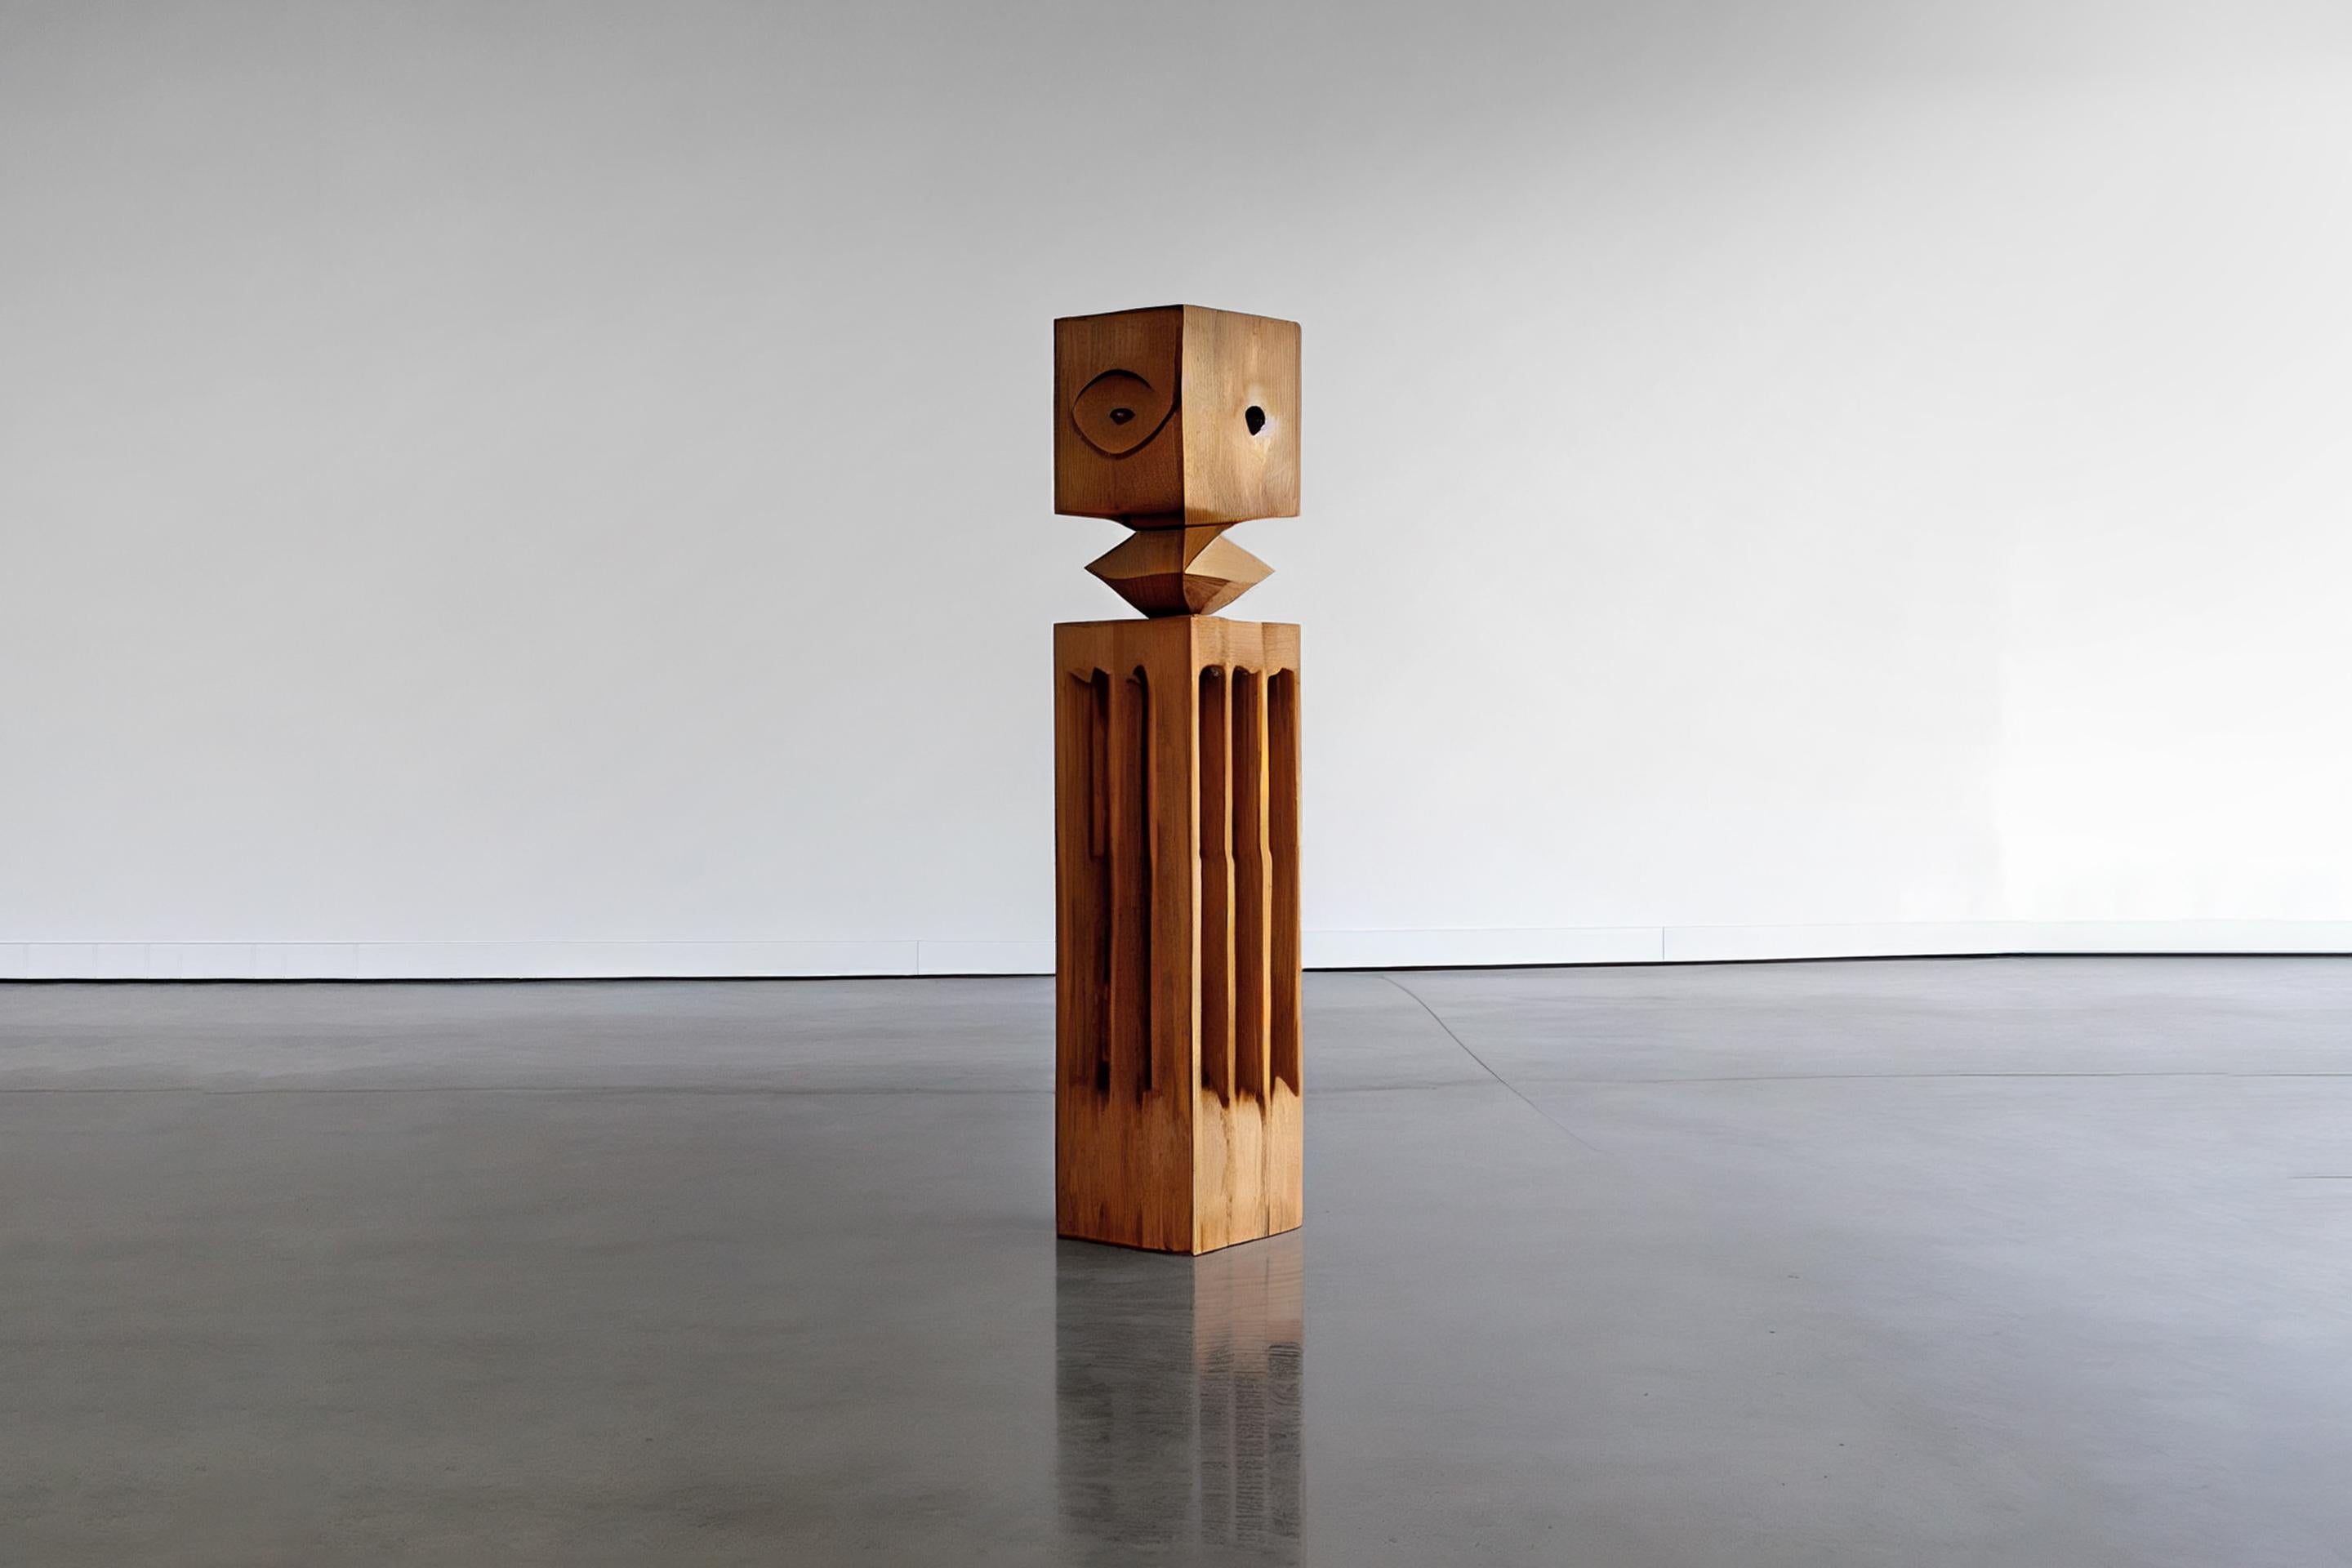 Figurative Wood Sculpture Inspired in Constantin Brancusi art, 3 Kings by NONO.

NONO furniture company introduces the 3 kings, a set of three monumental totems inspired by the works of Constantin Brancusi.
 
The 3 kings are a handcrafted